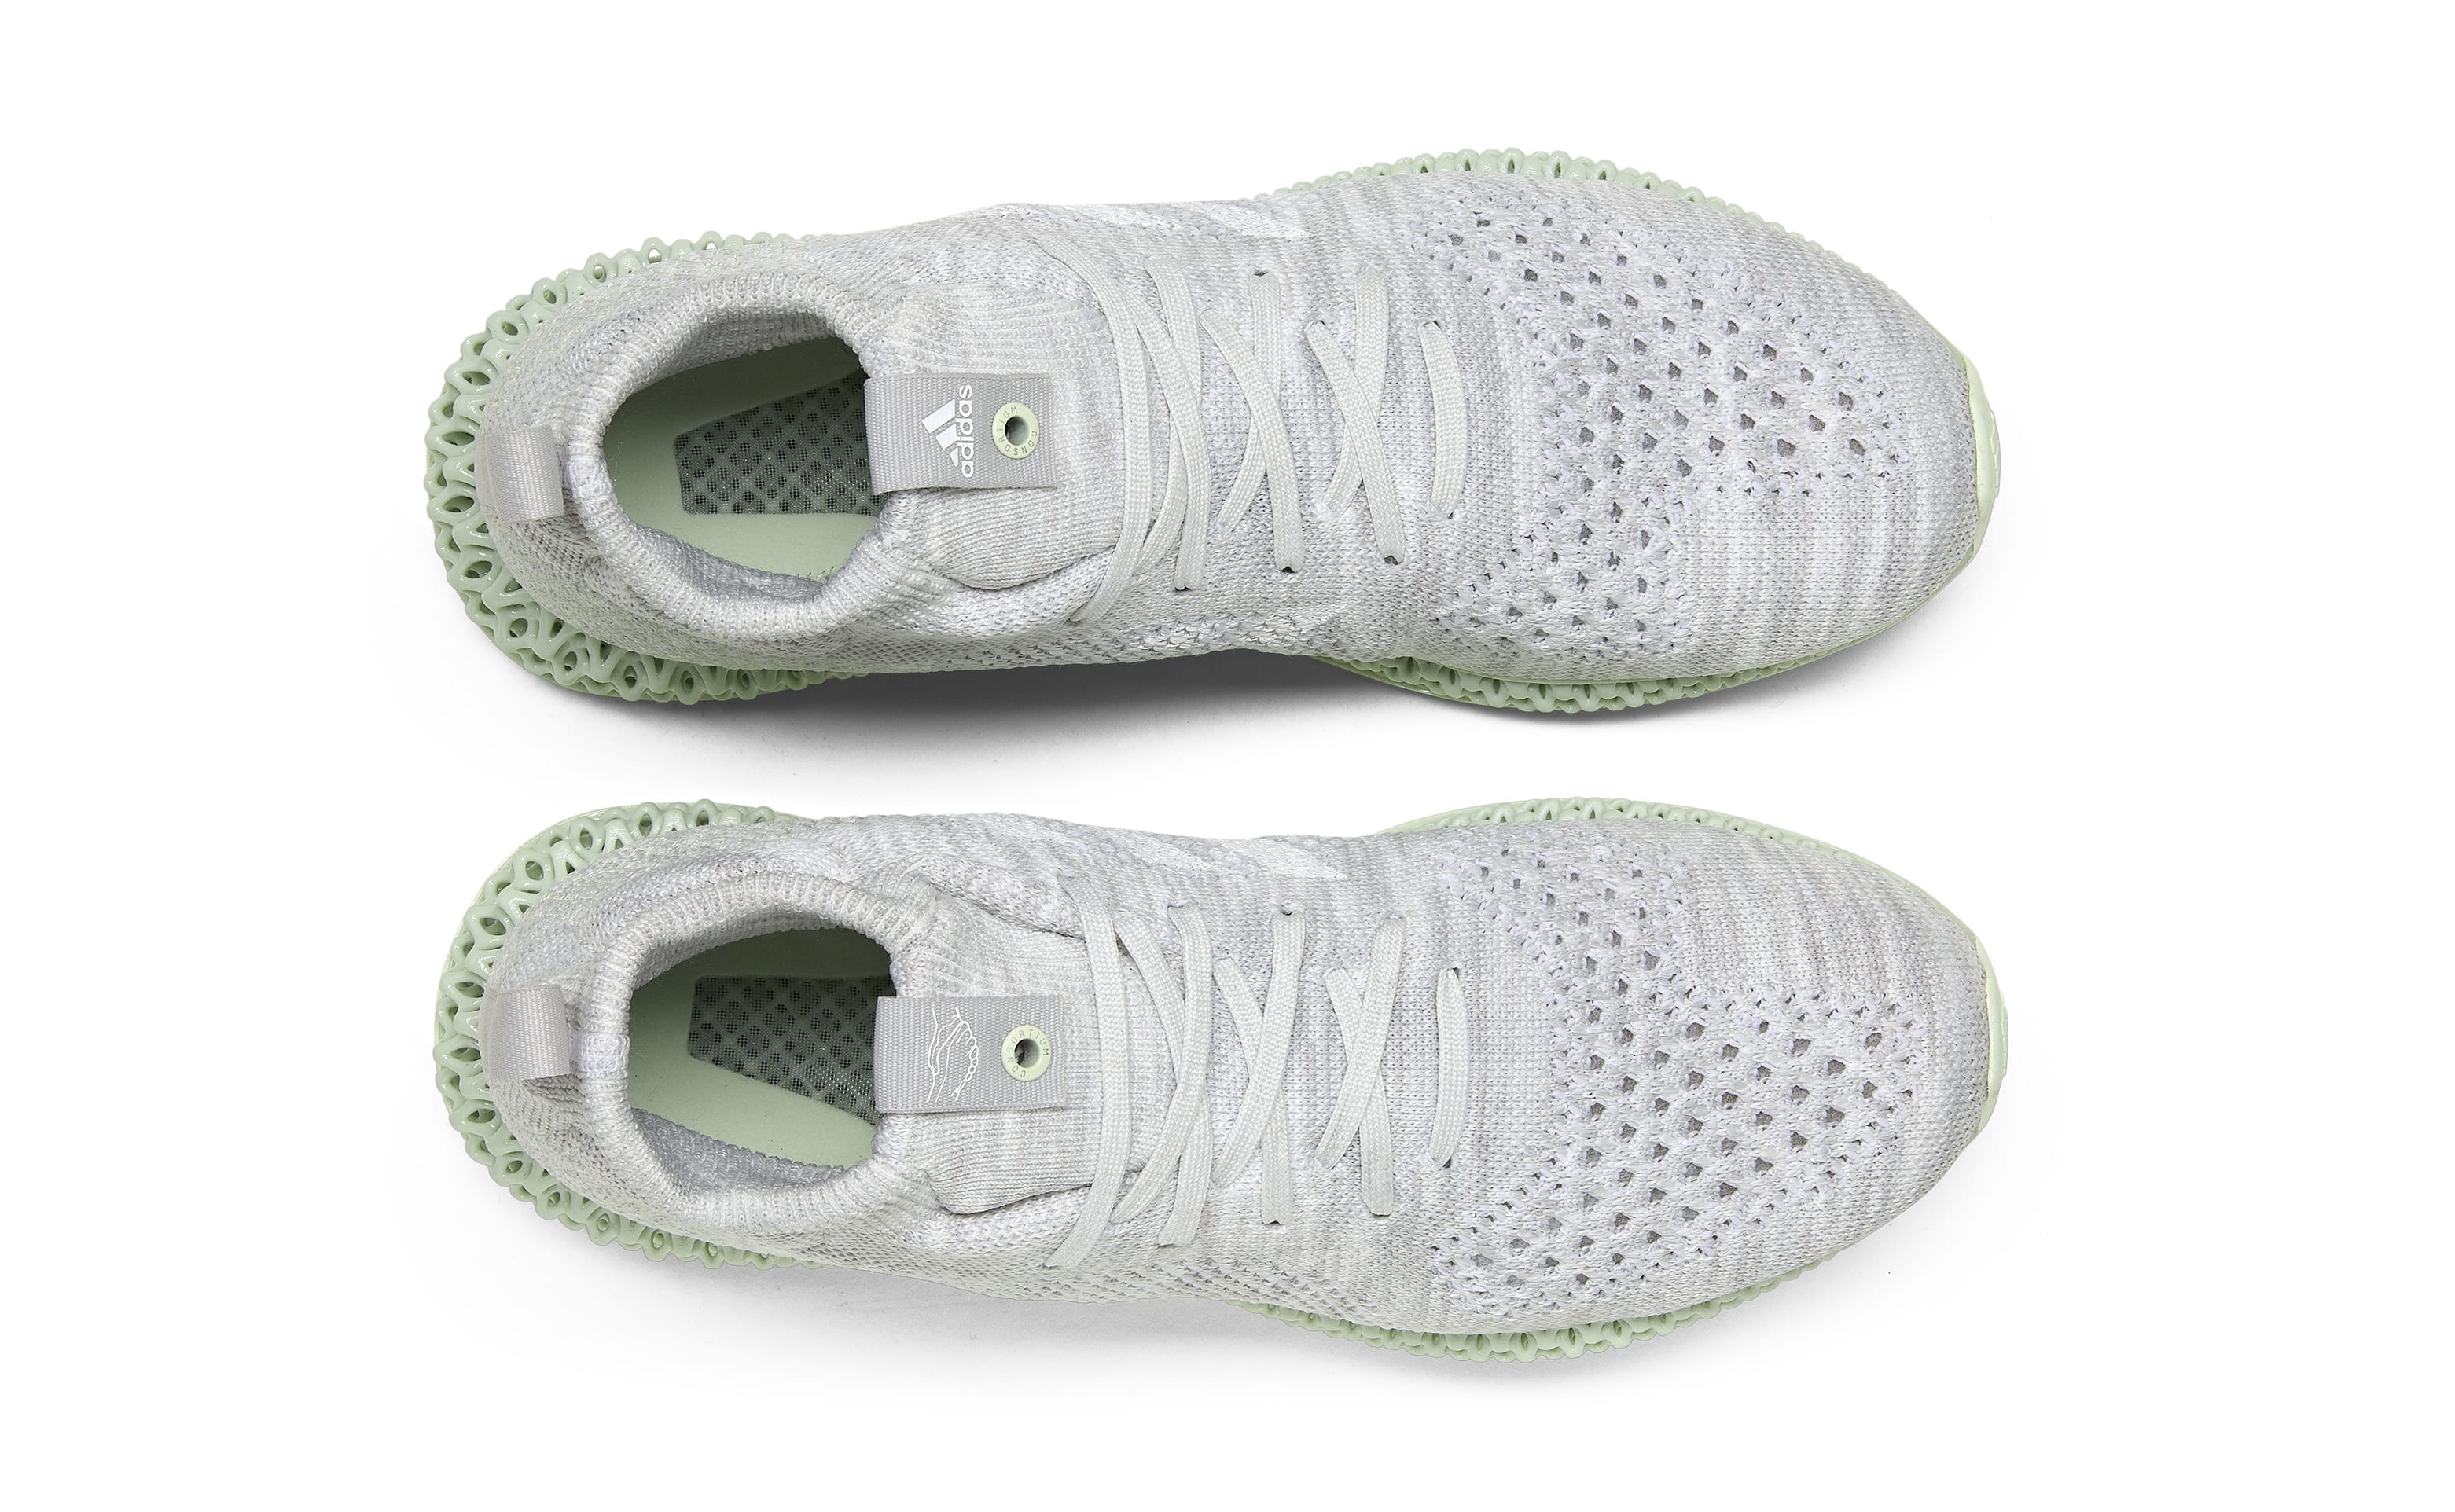 mound Advise tournament Adidas Consortium Runner 4D Mid 'White' EE4116 Release Date | Sole Collector